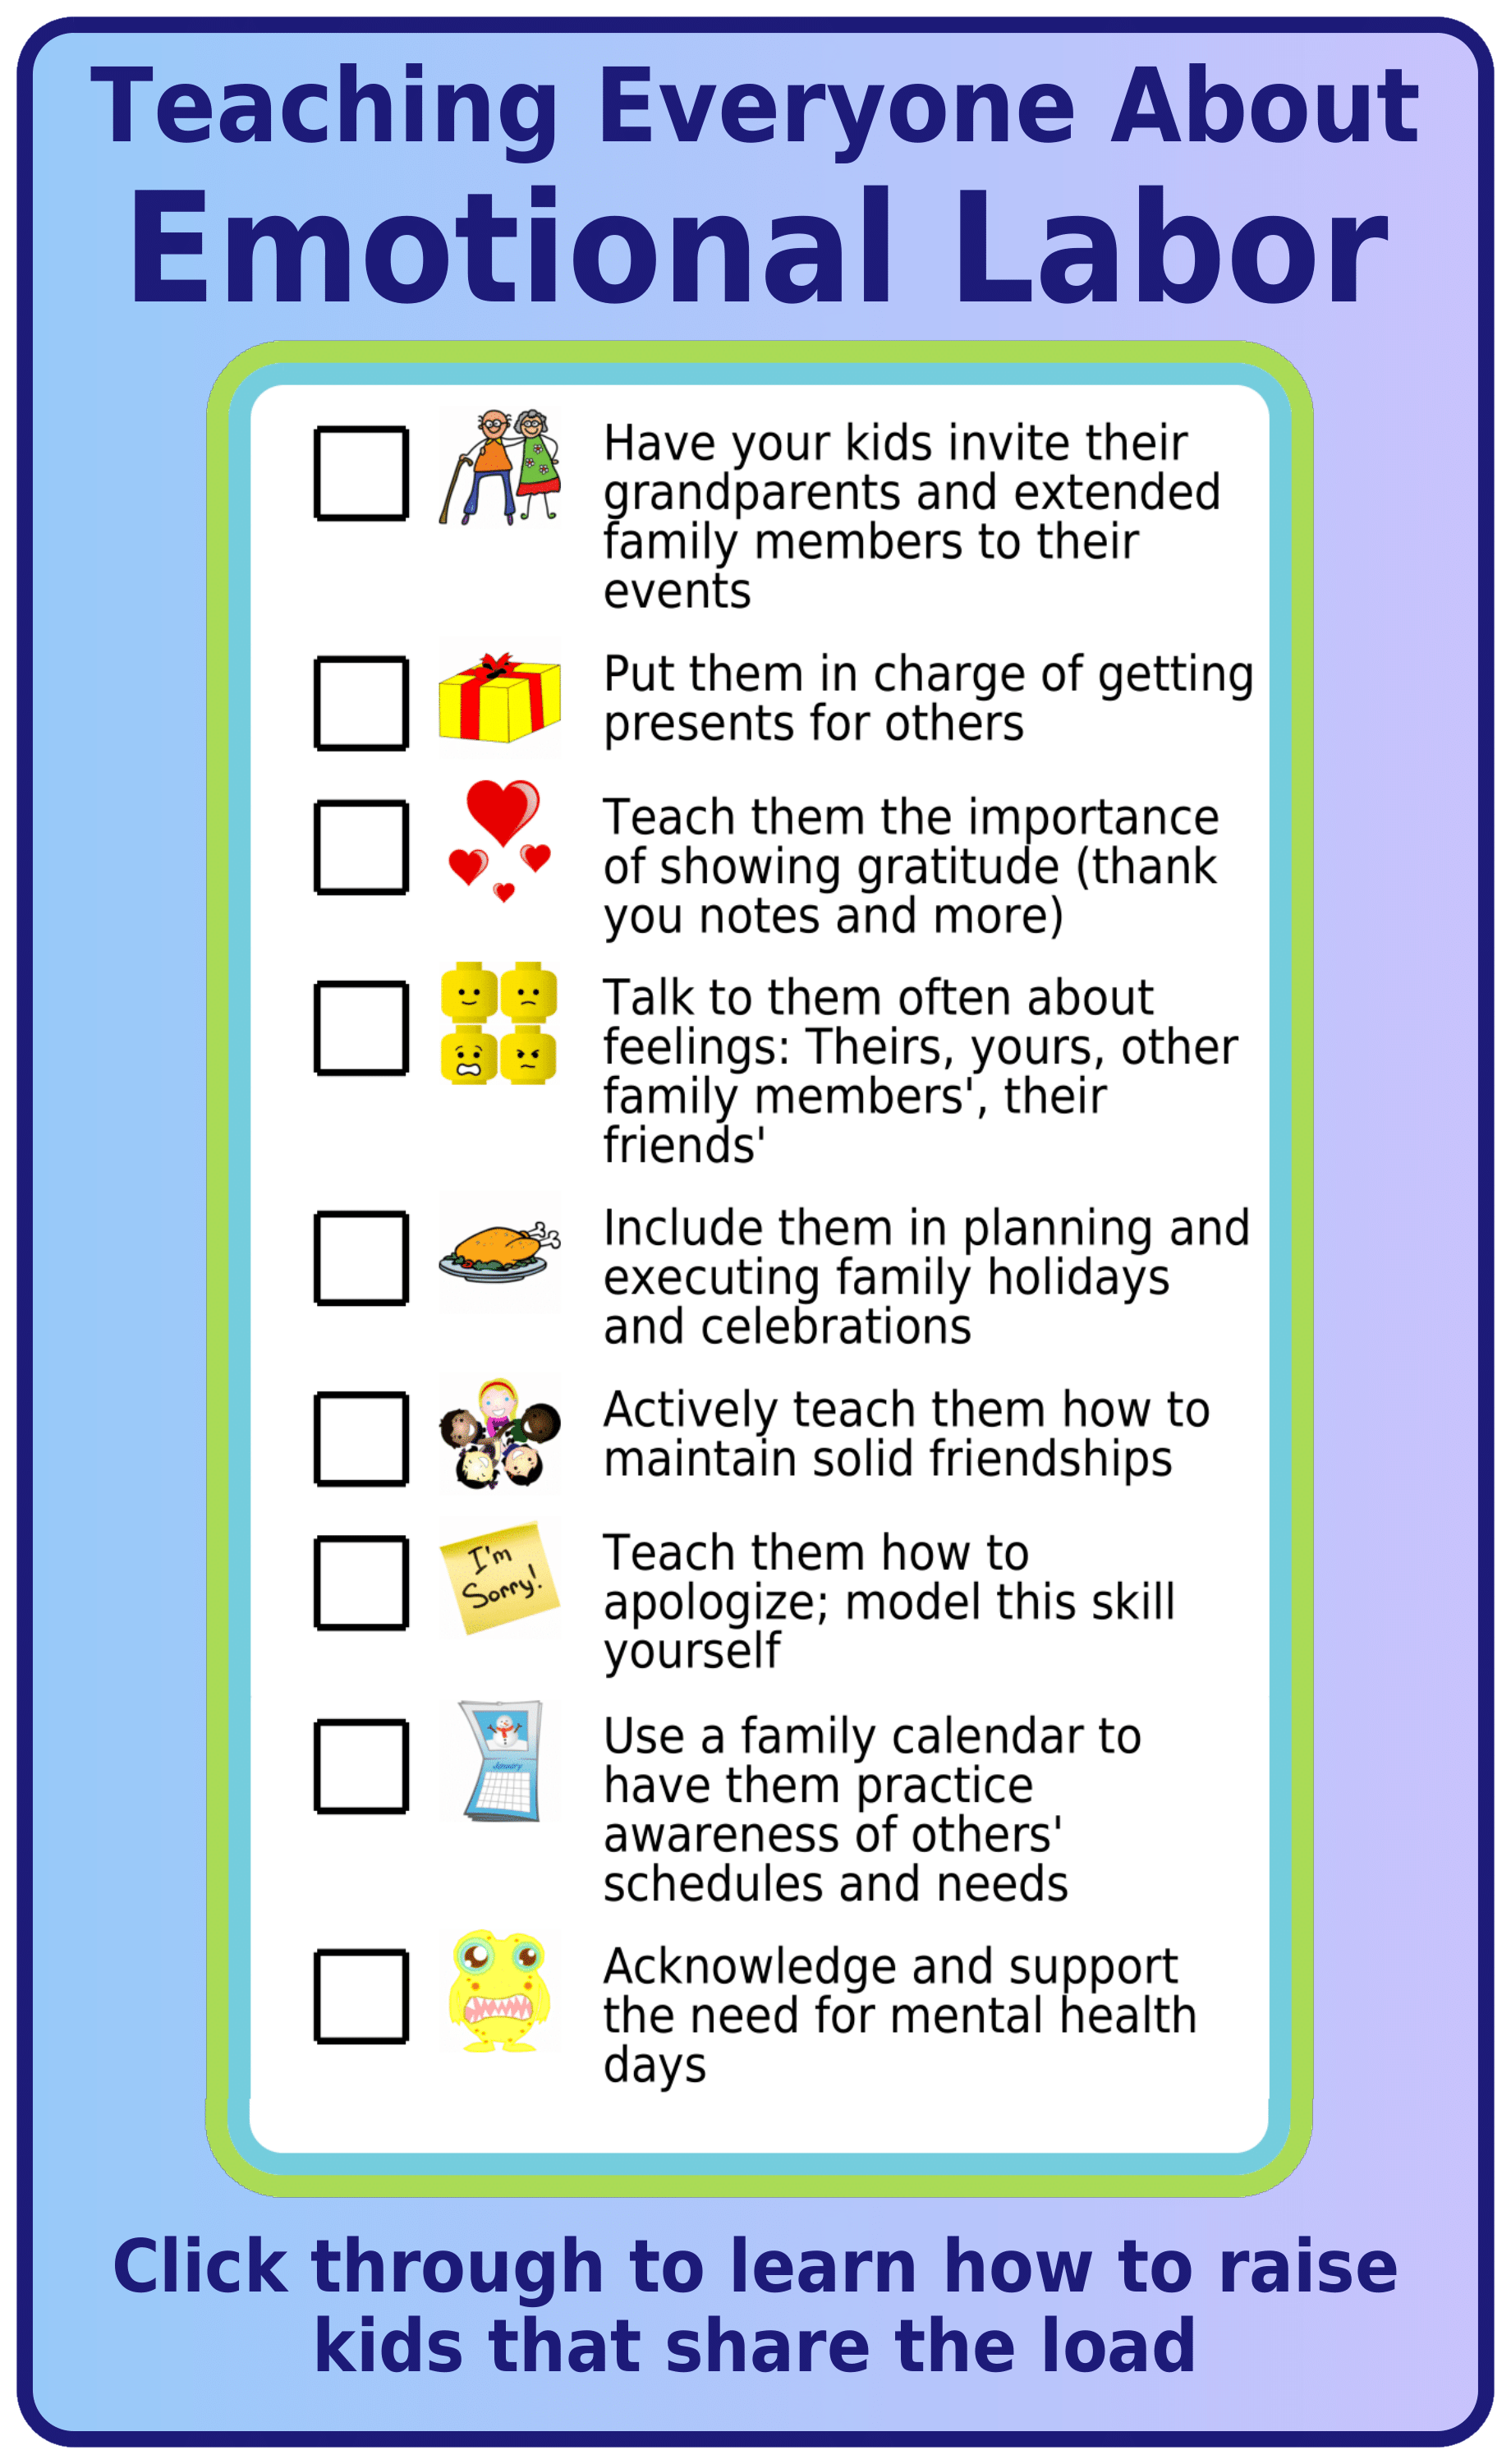 Picture checklist for how to teach kids about emotional labor